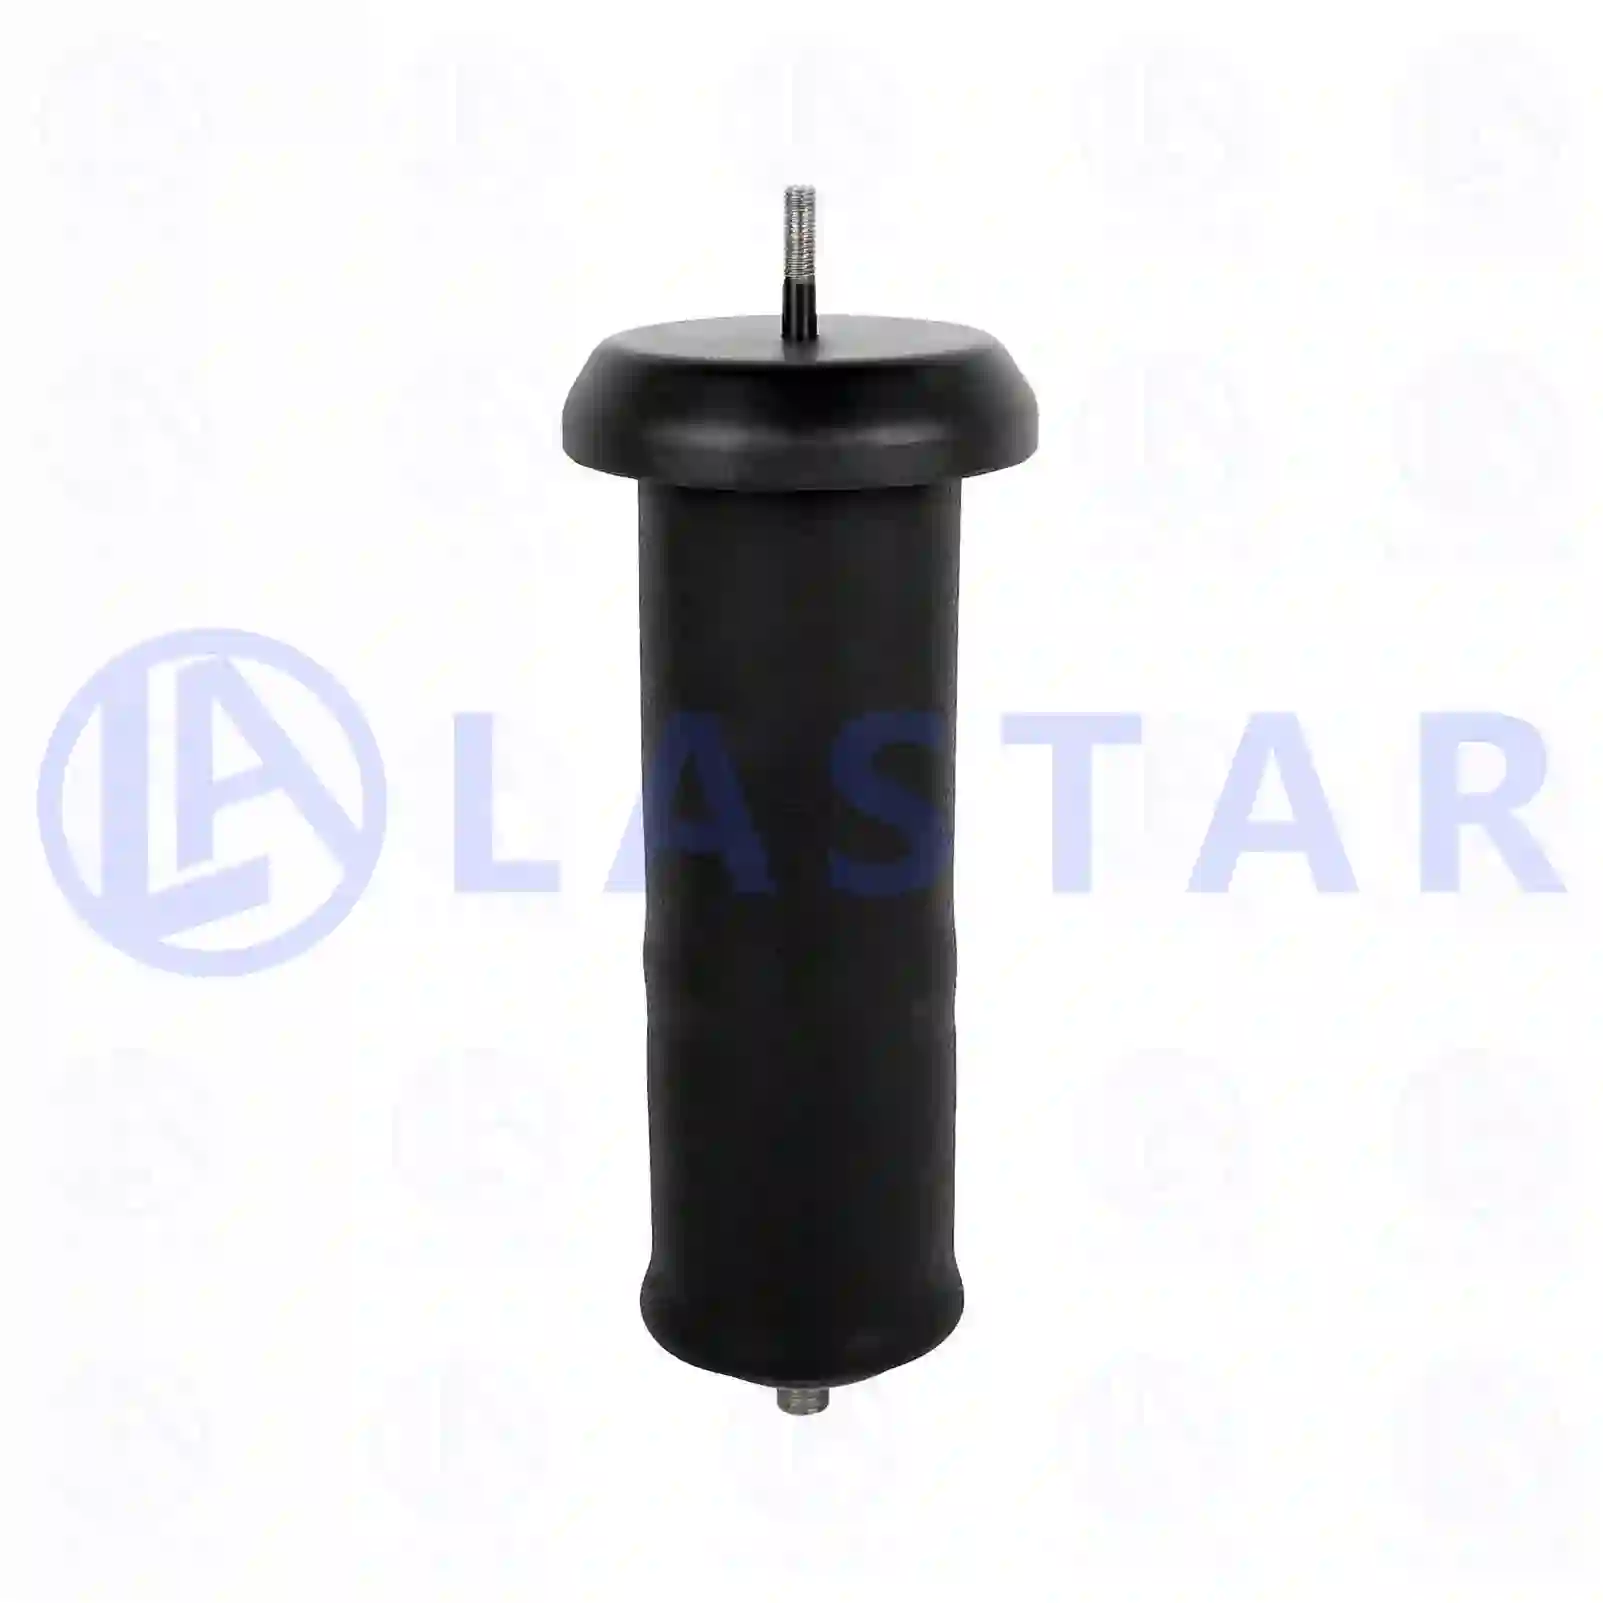 Air spring, with steel piston, 77729591, 20534645, , , ||  77729591 Lastar Spare Part | Truck Spare Parts, Auotomotive Spare Parts Air spring, with steel piston, 77729591, 20534645, , , ||  77729591 Lastar Spare Part | Truck Spare Parts, Auotomotive Spare Parts